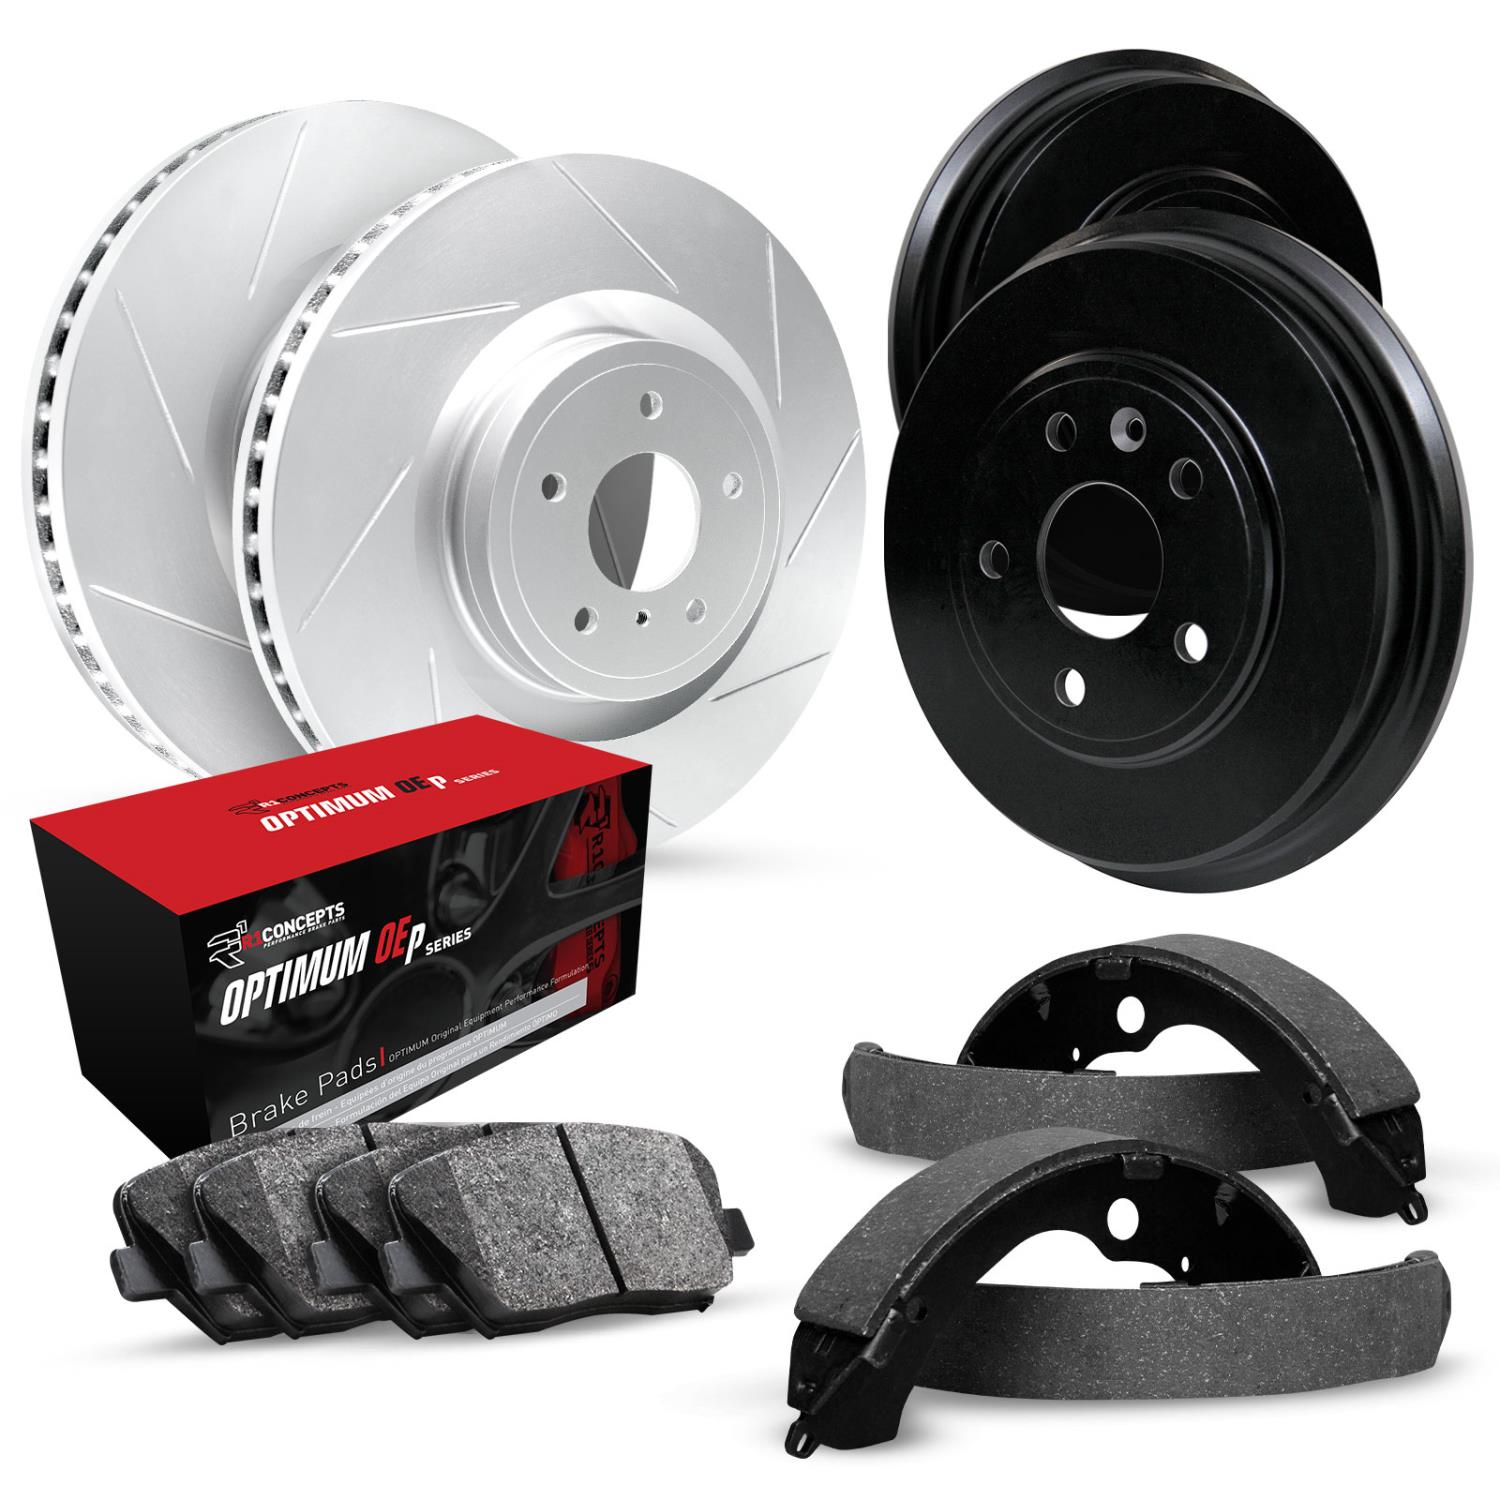 GEO-Carbon Slotted Brake Rotor & Drum Set w/Optimum OE Pads & Shoes, 2007-2017 Infiniti/Nissan, Position: Front & Rear